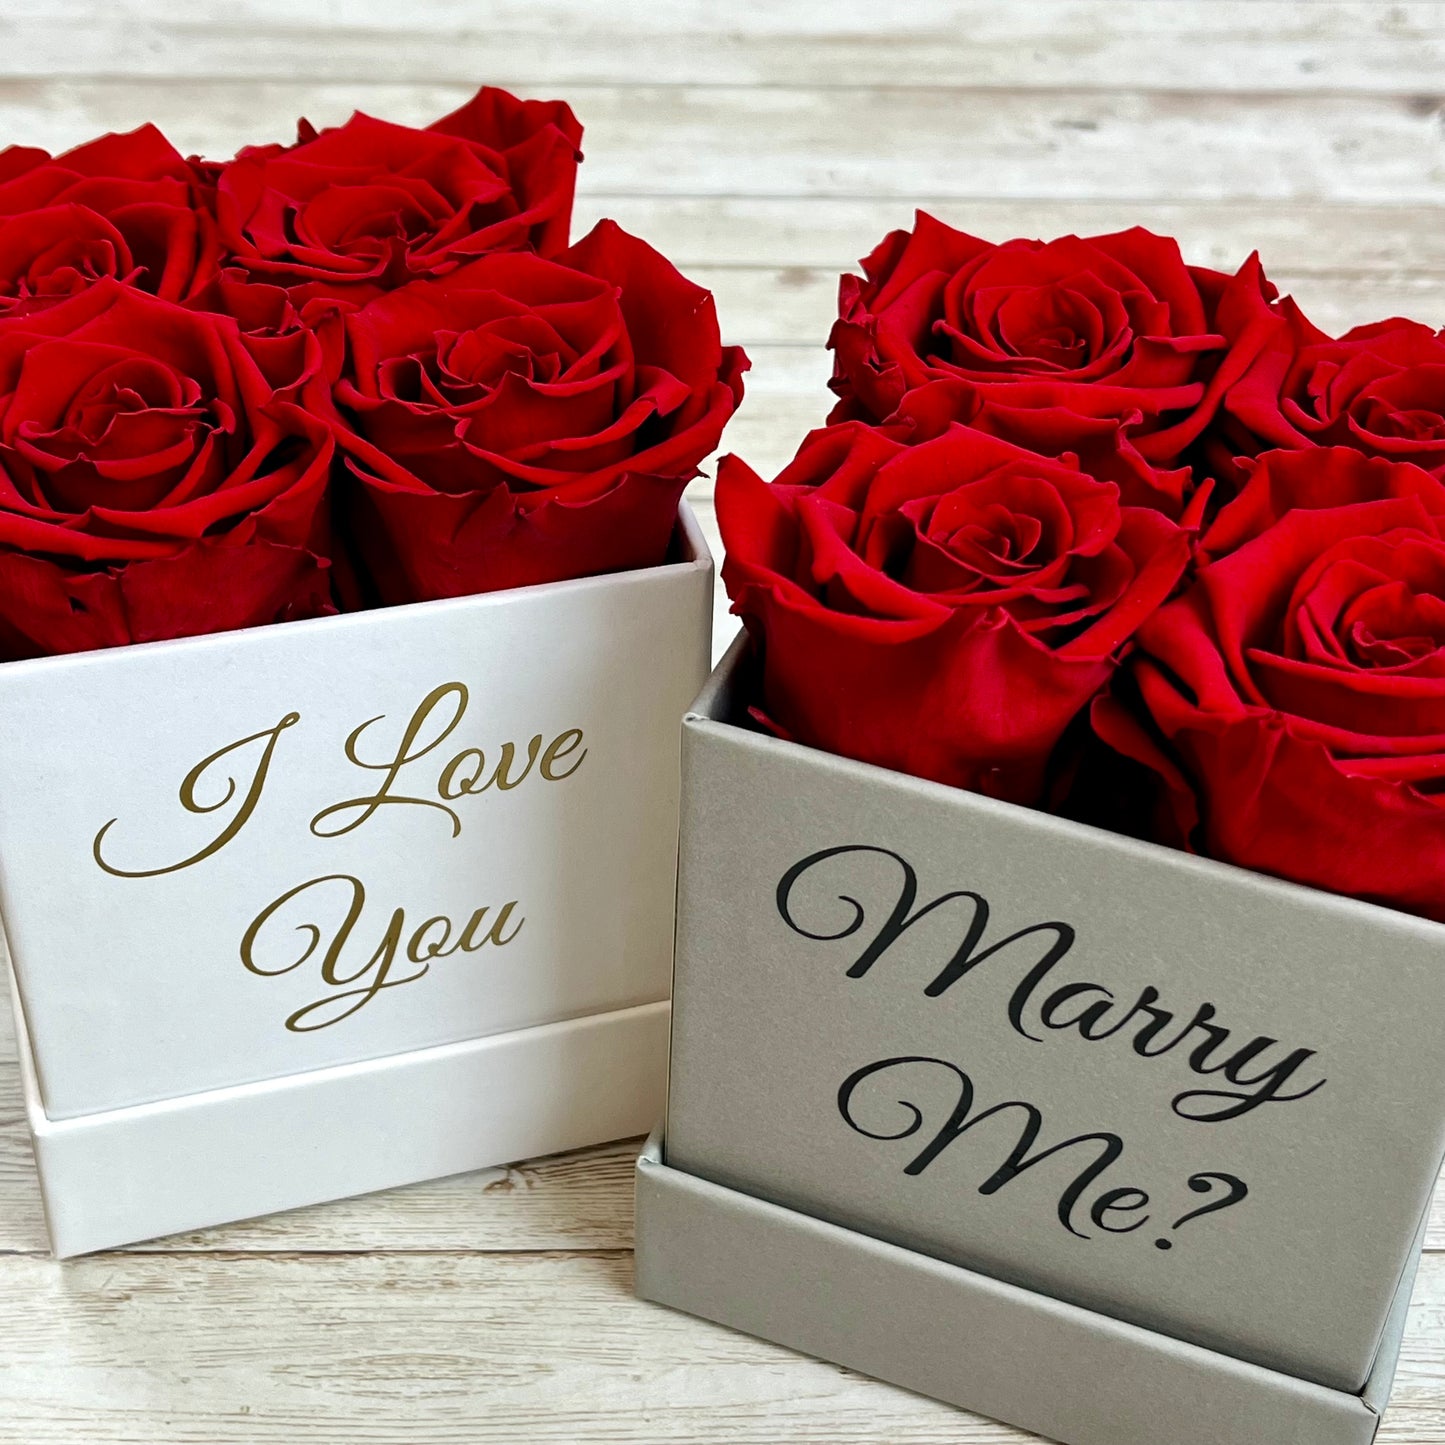 Petite Square |White & Grey Infinity Rose Boxes | One Year Roses